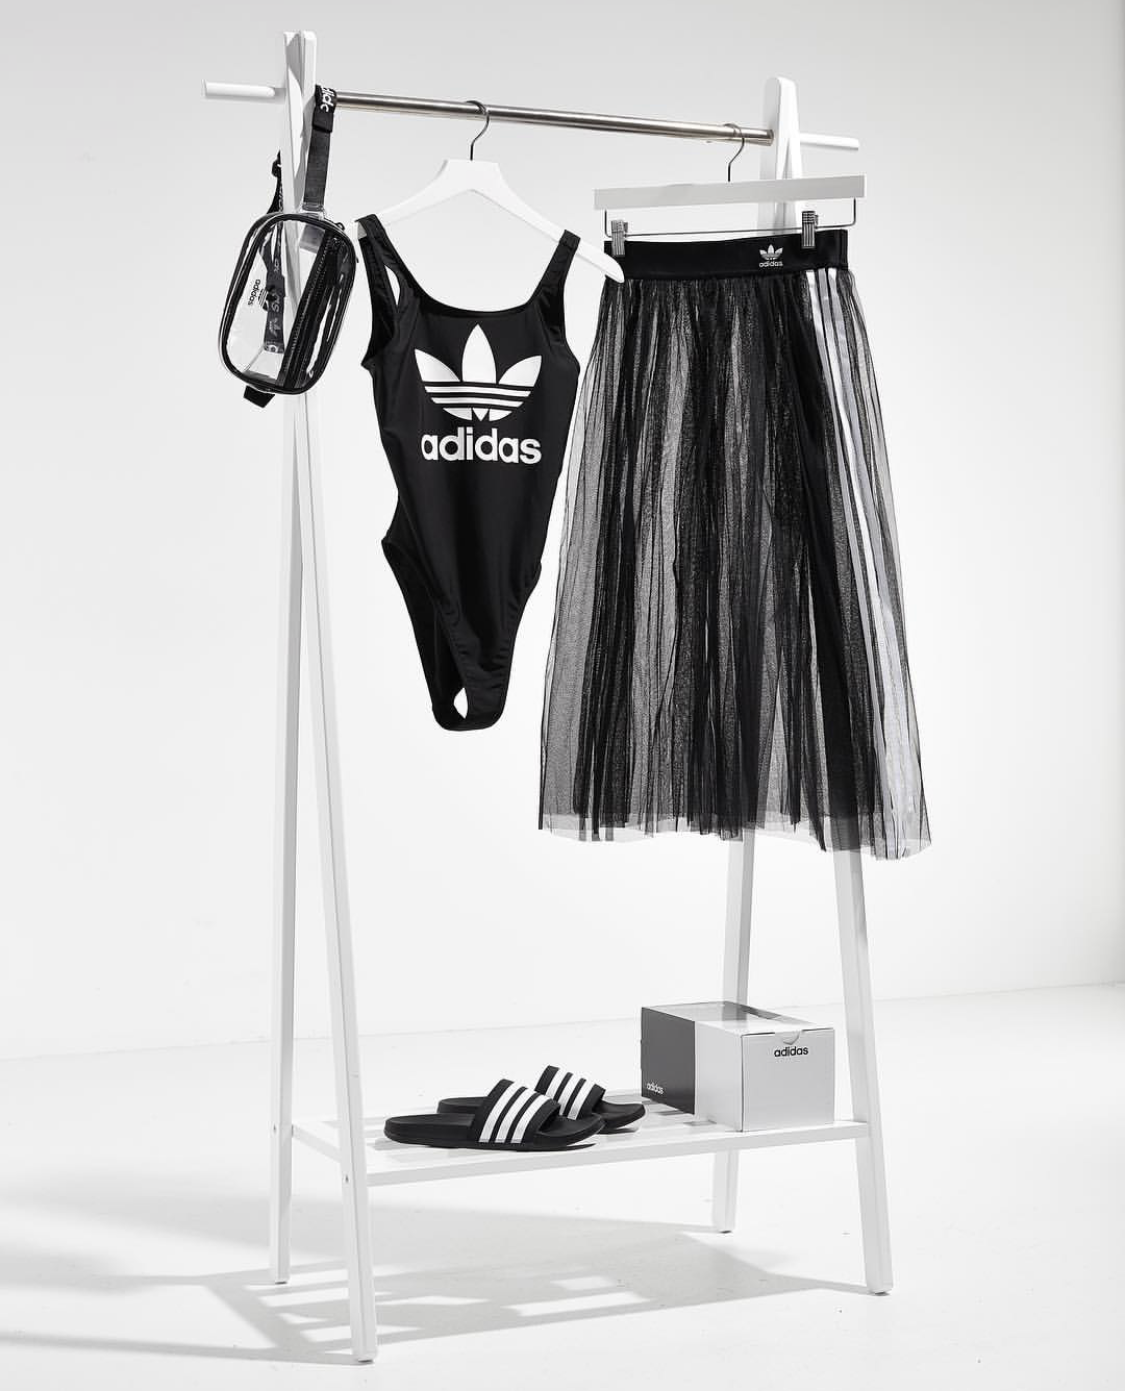 adidas skirt outfit